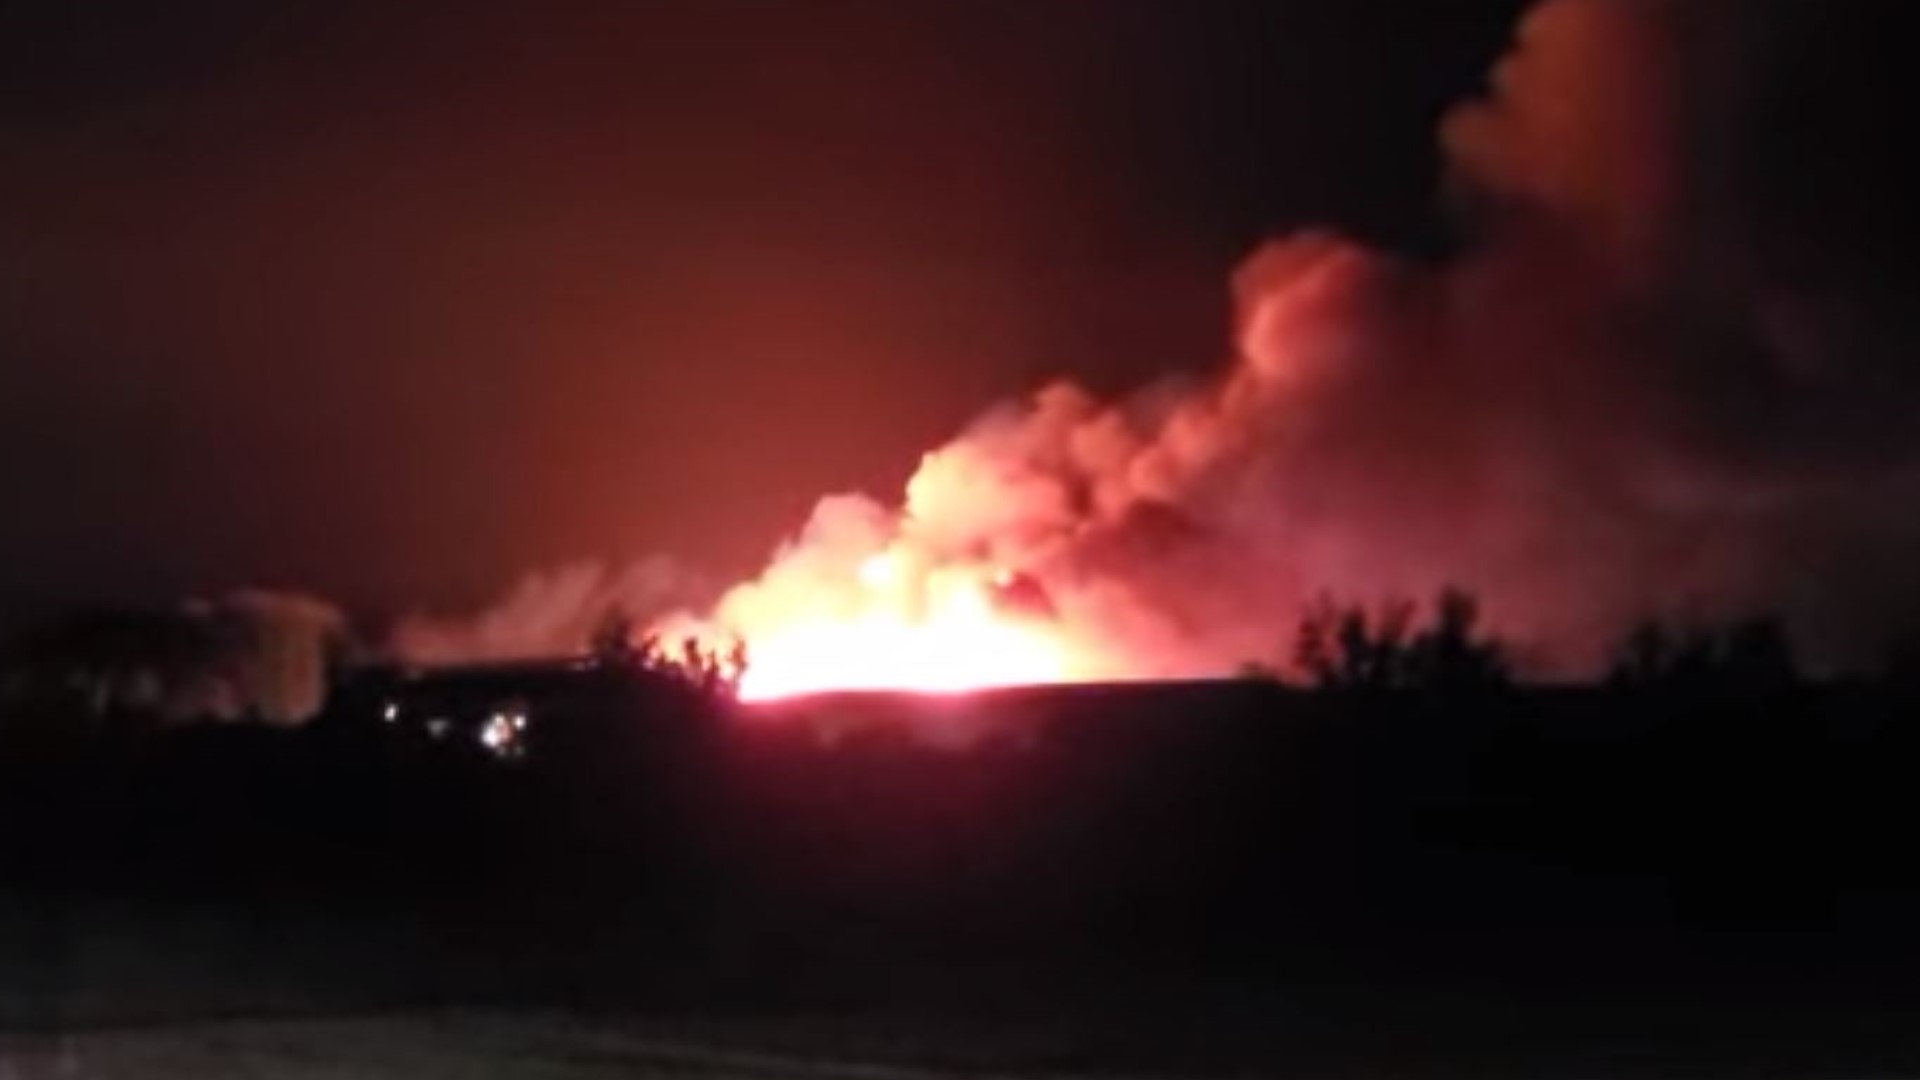 A Saturday night fire destroyed a poultry building at Forsman Farms. A farm spokesperson says at least tens of thousands of chickens were killed in the fire.